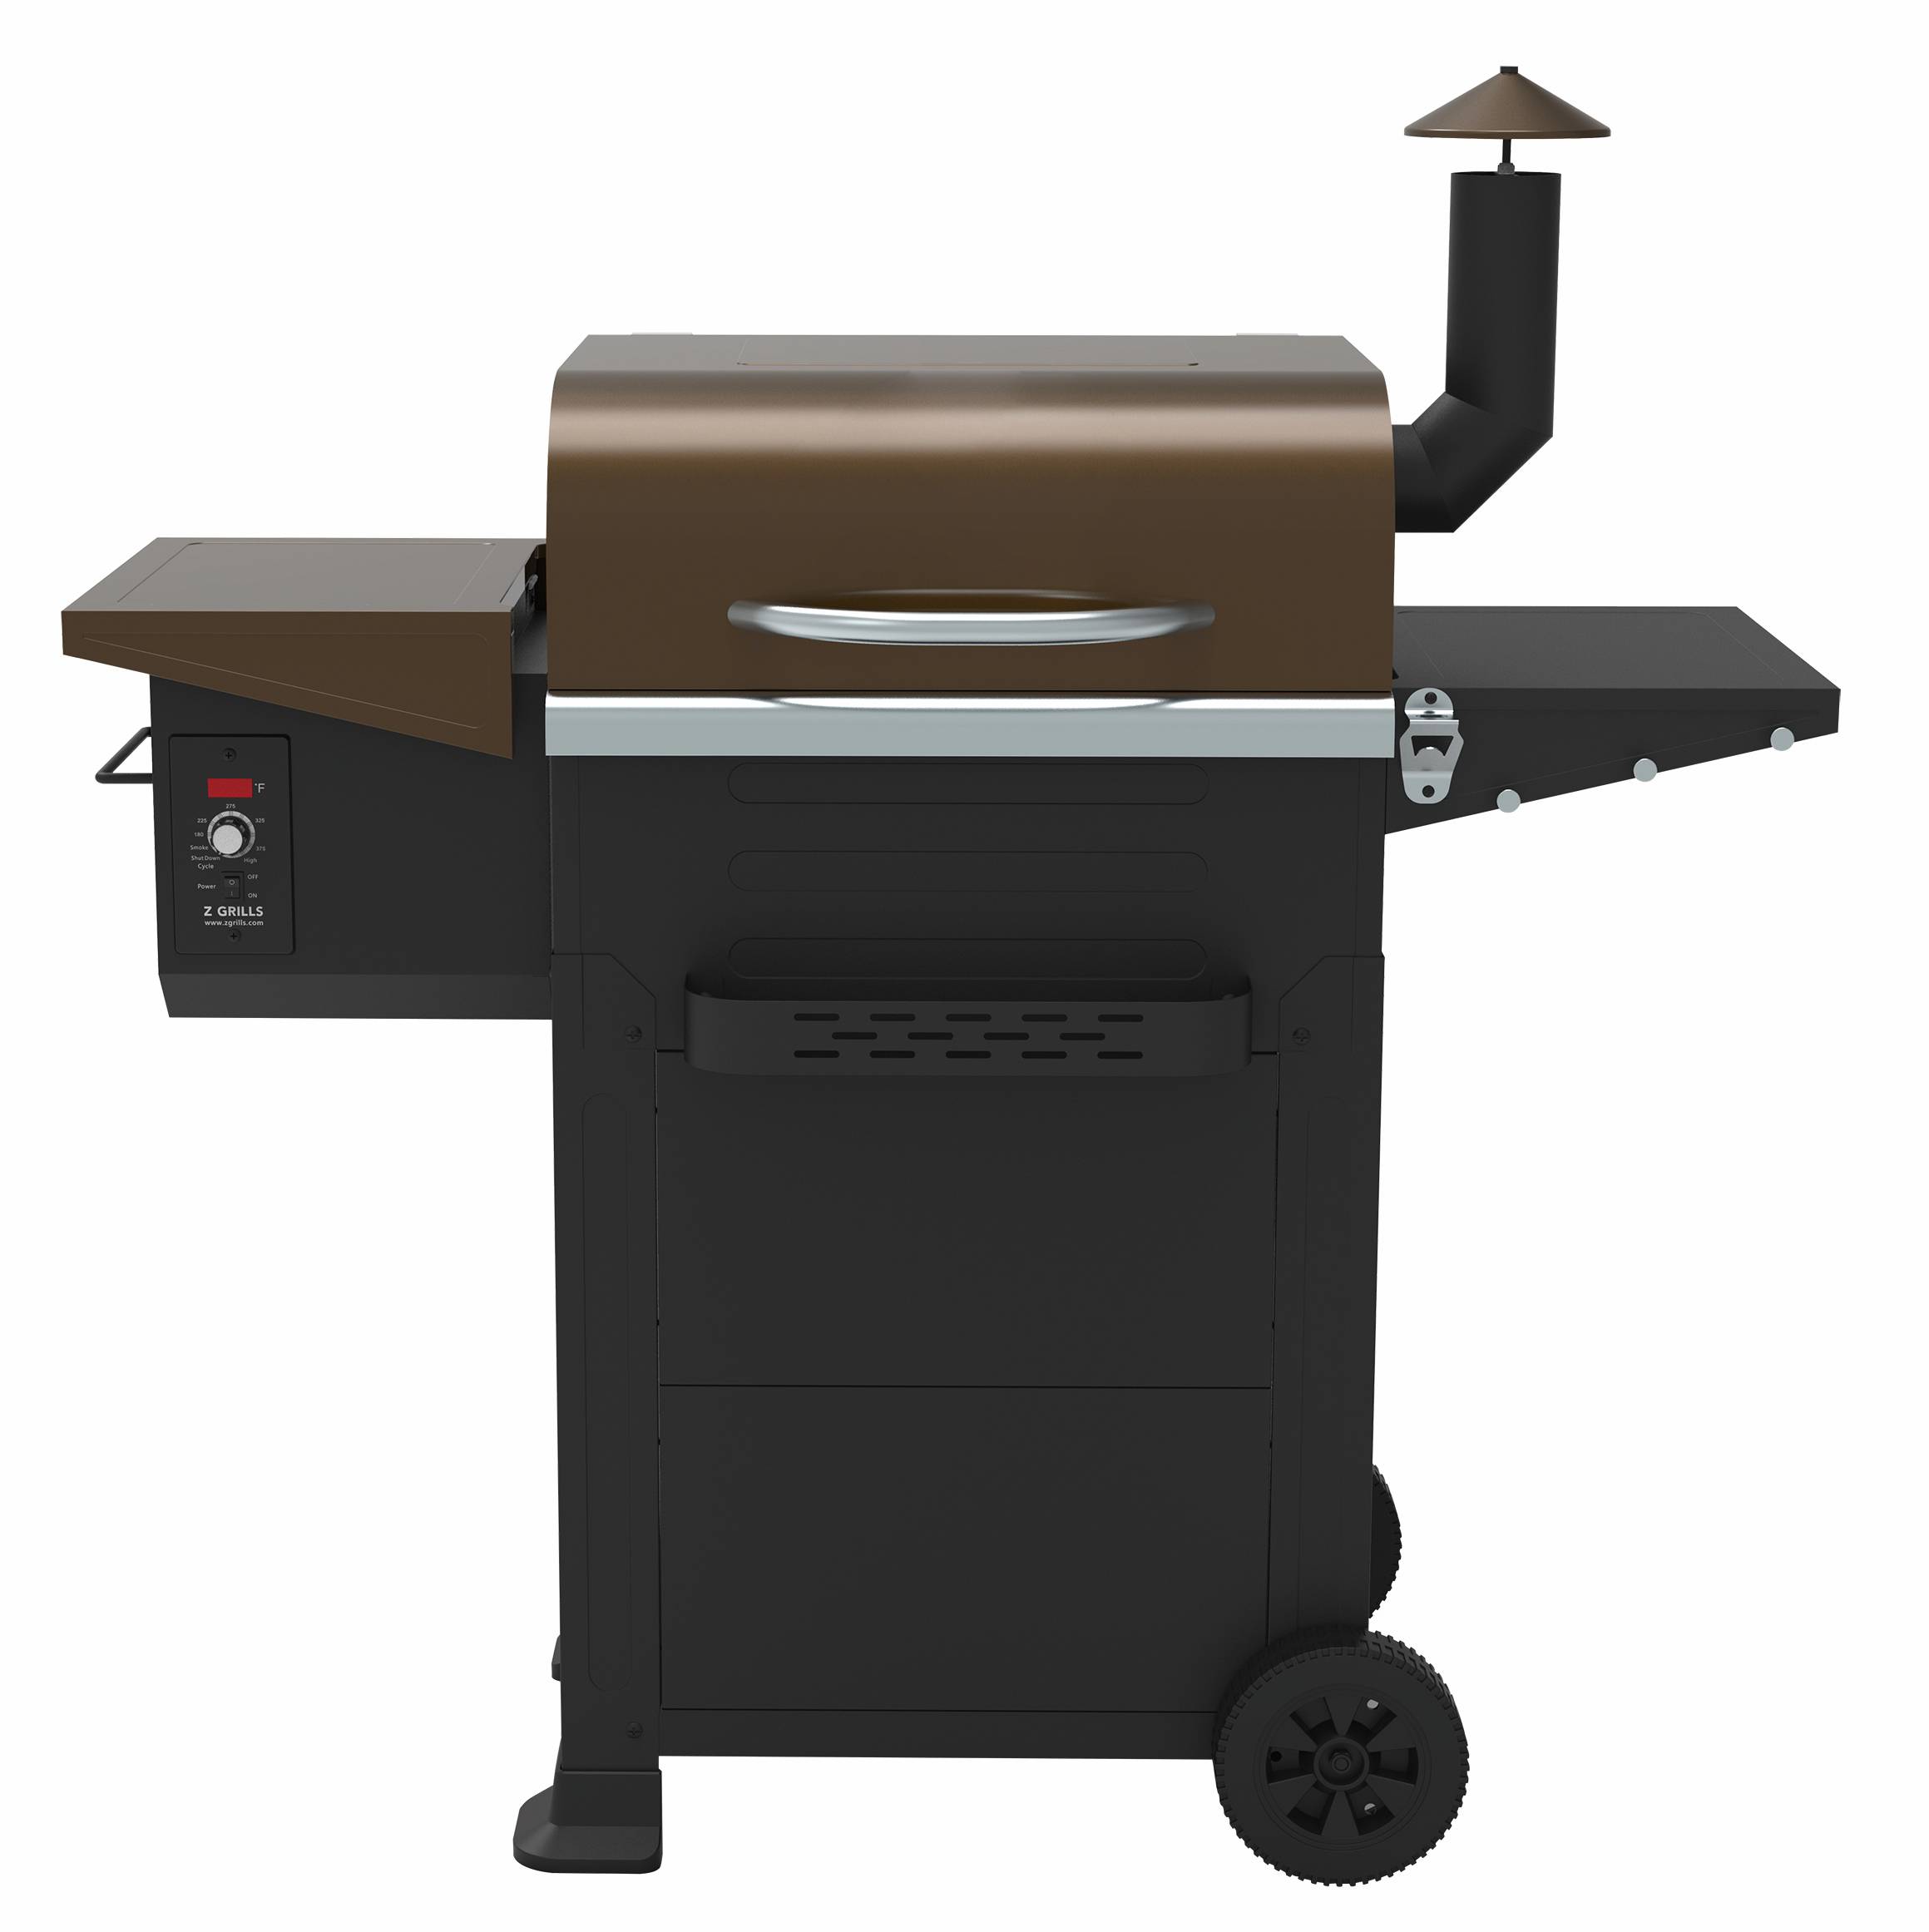 Z G  573 sq. in.  Grill & Smoker - image 1 of 3